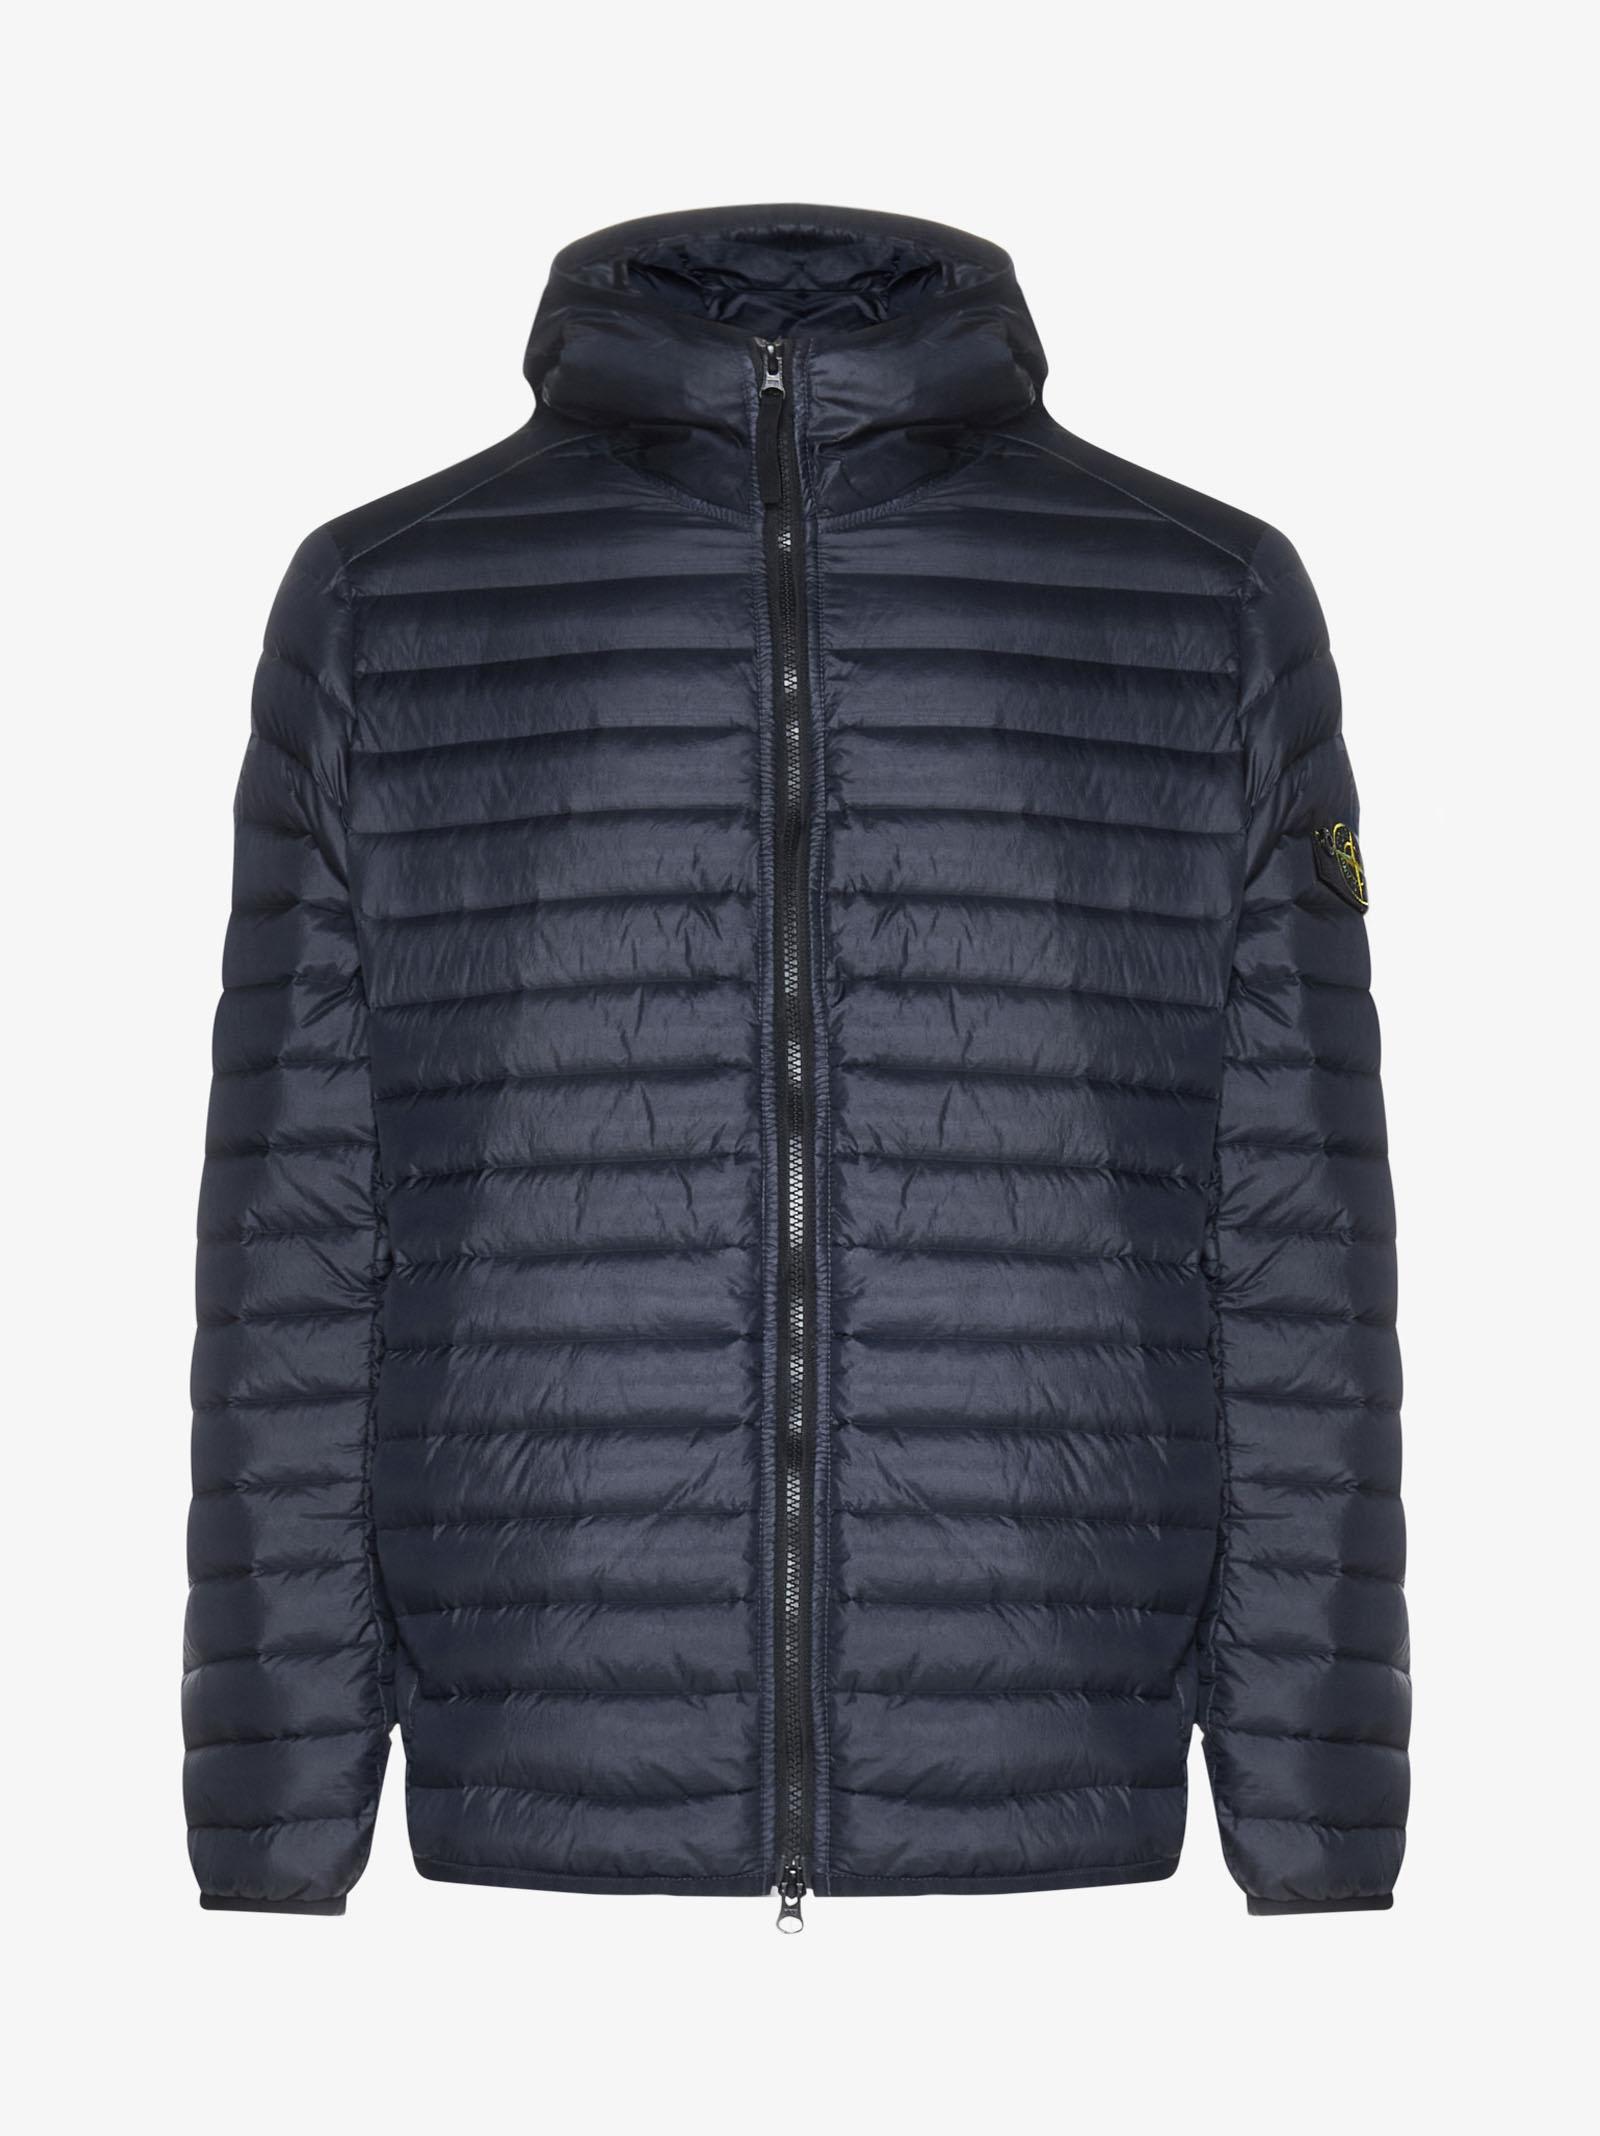 Stone Island Hooded Quilted Nylon Down Jacket